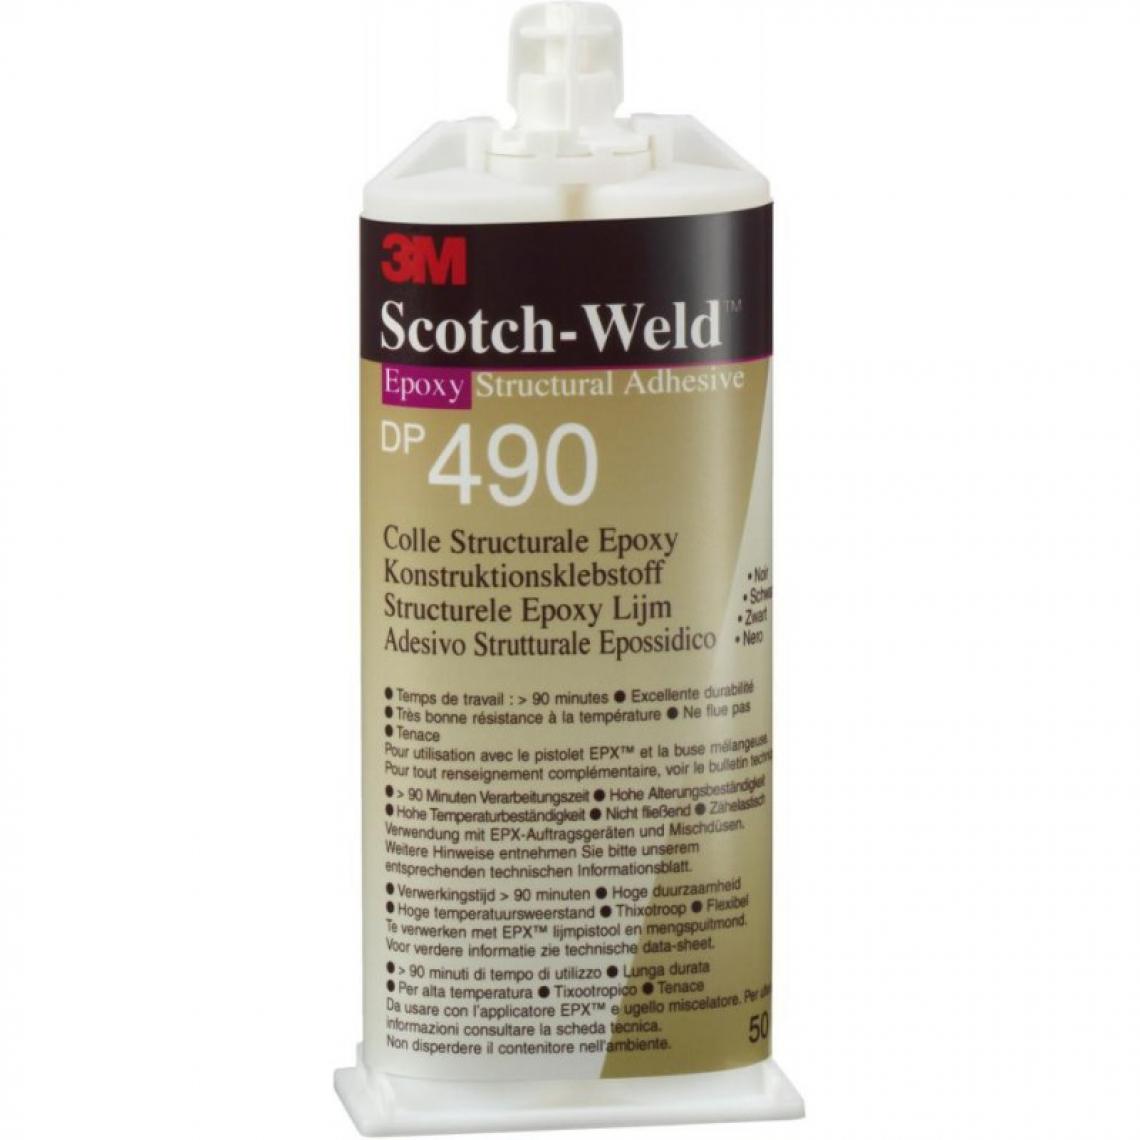 3M - Colle epoxy SW DP 490 2-K-EPX-noir 50ml 3M - Mastic, silicone, joint